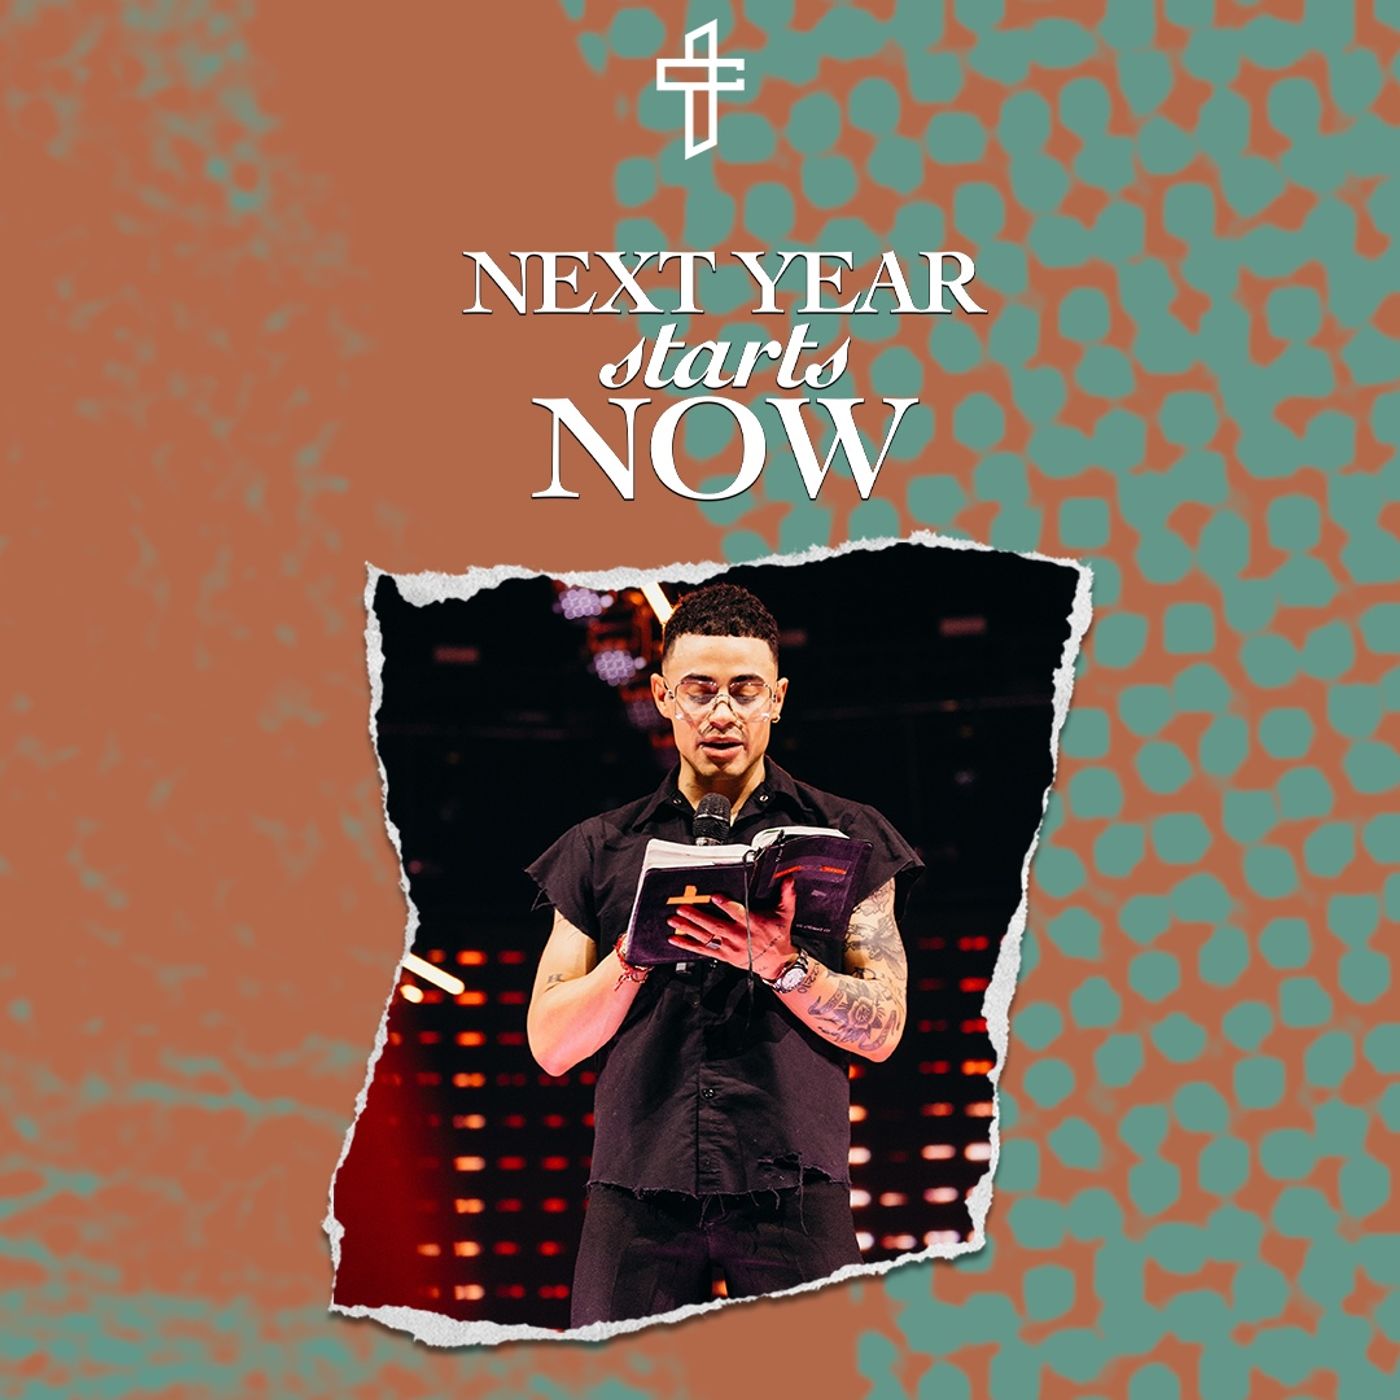 Next Year Starts Now // End in Triumph: Damaged But Not Destroyed (Part 12) // Charles Metcalf